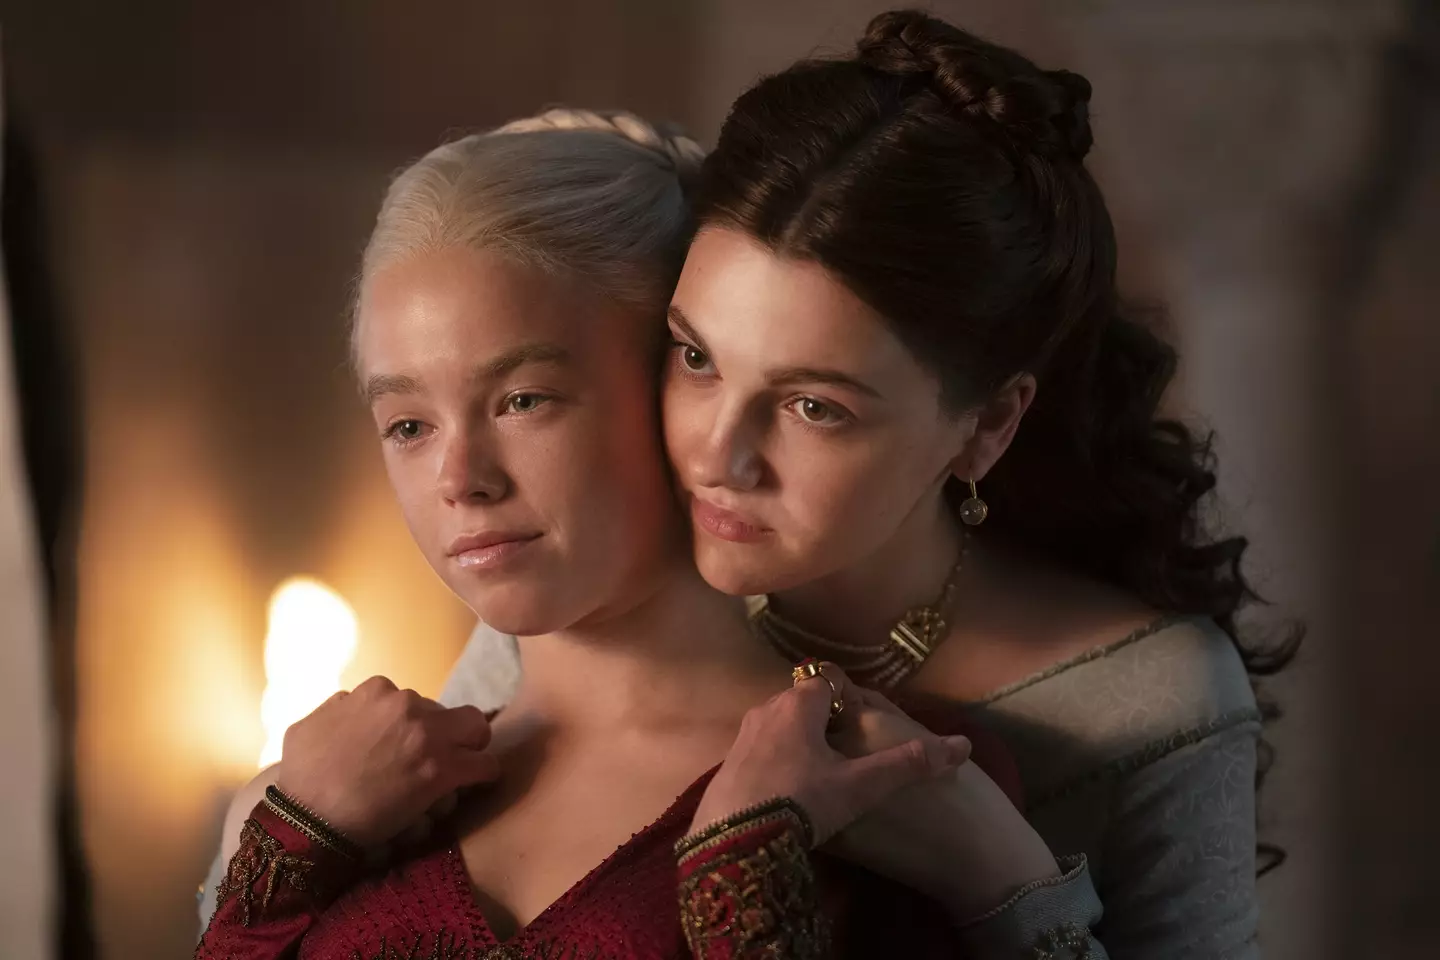 Game of Thrones fans are worried about the sexual violence content in House of the Dragon.